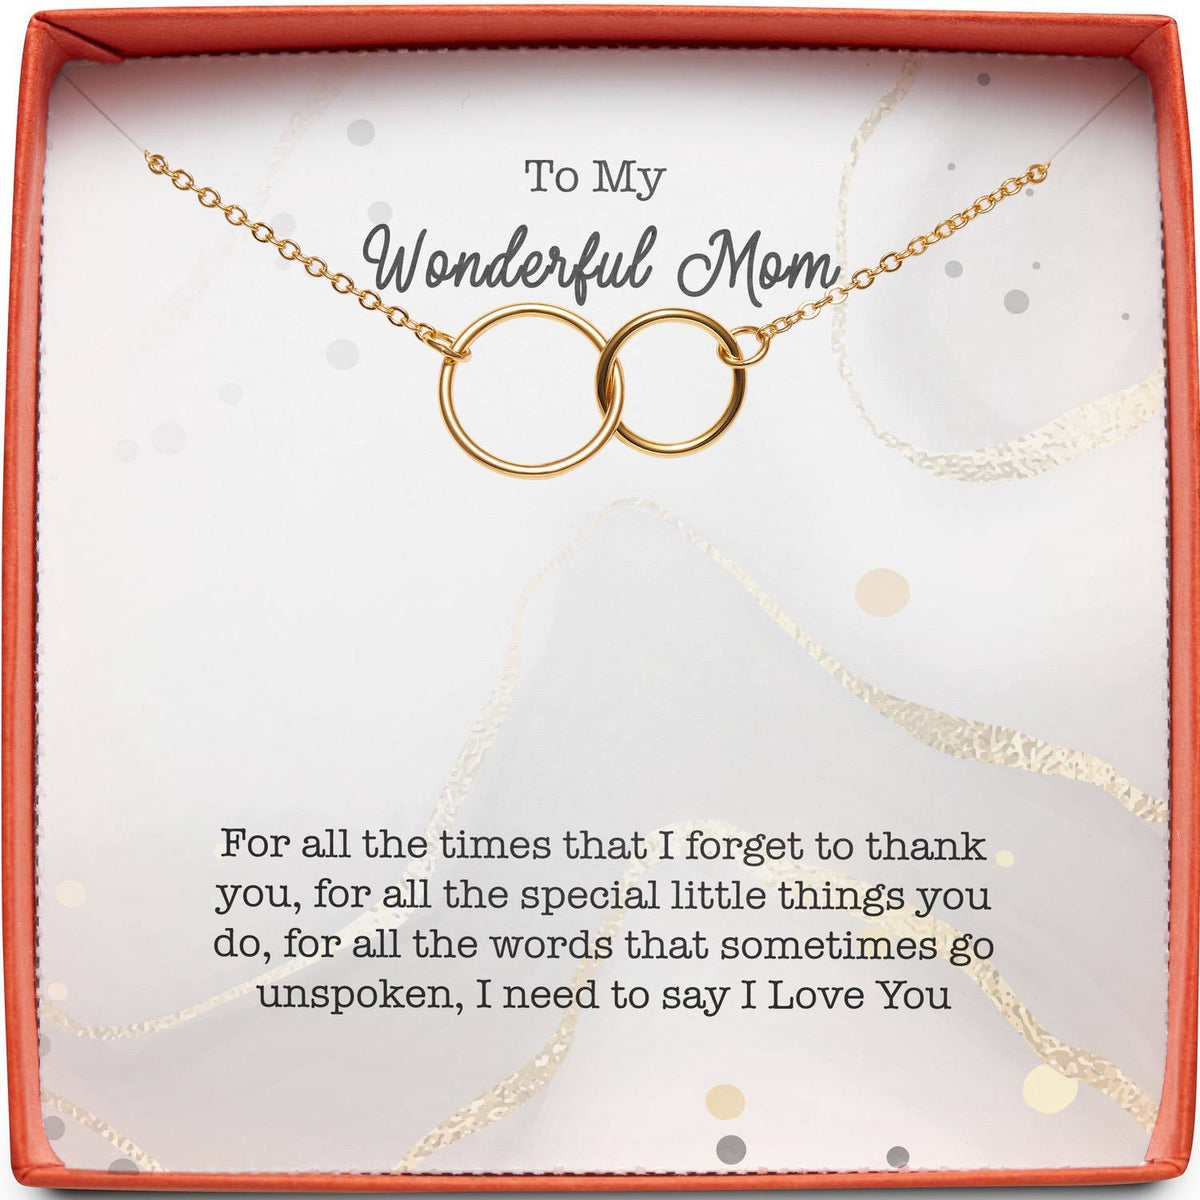 To My Wonderful Mom | Special Little Things You Do | Interlocking Circles